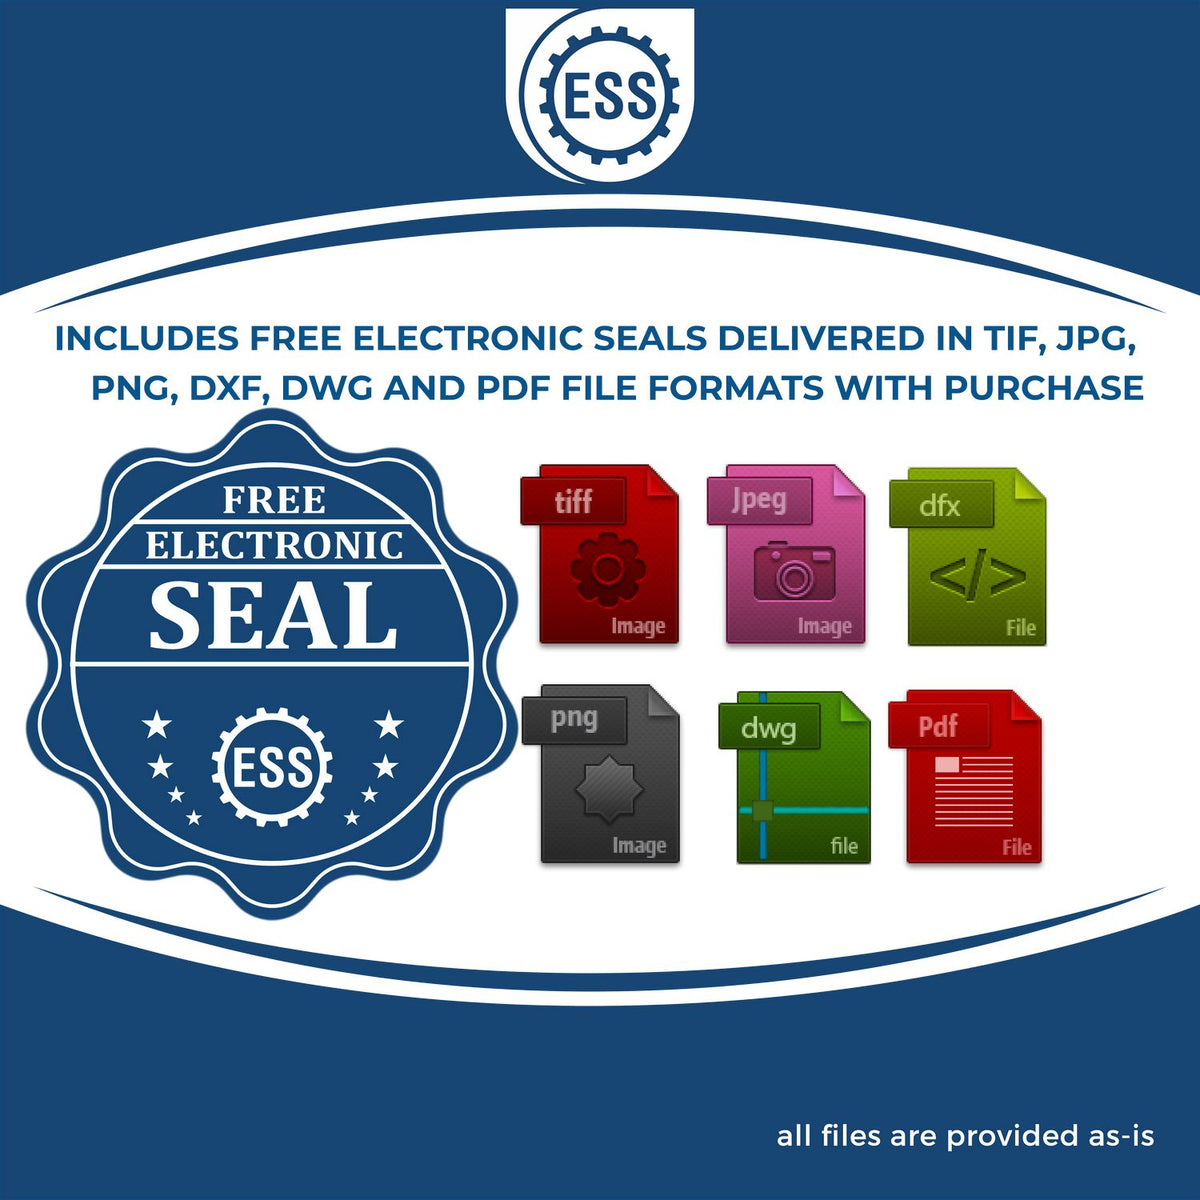 An infographic for the free electronic seal for the Hybrid Maryland Land Surveyor Seal illustrating the different file type icons such as DXF, DWG, TIF, JPG and PNG.